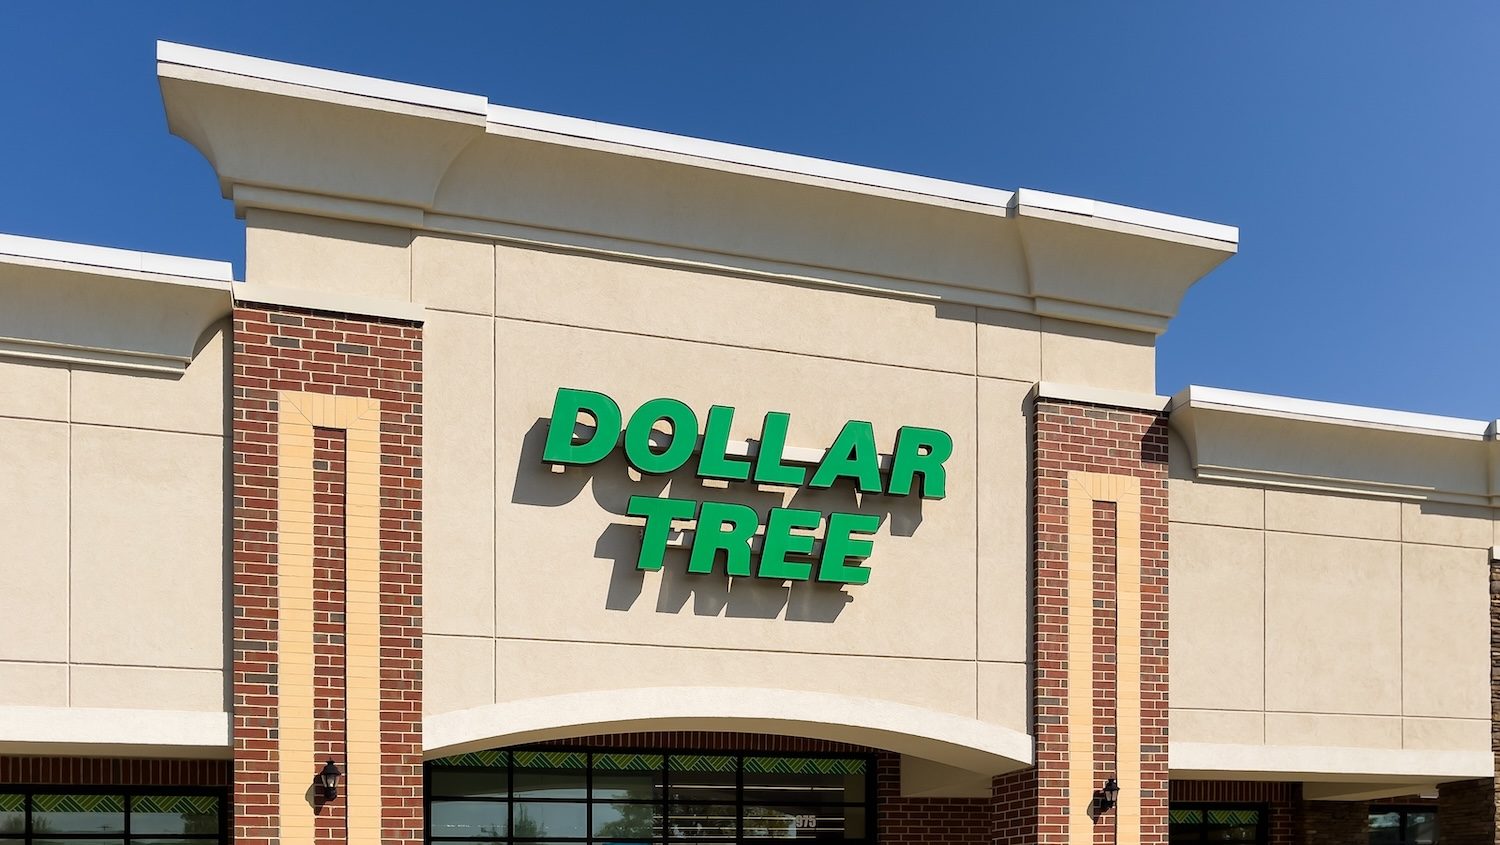 9-beauty-products-for-$1.25-at-dollar-tree